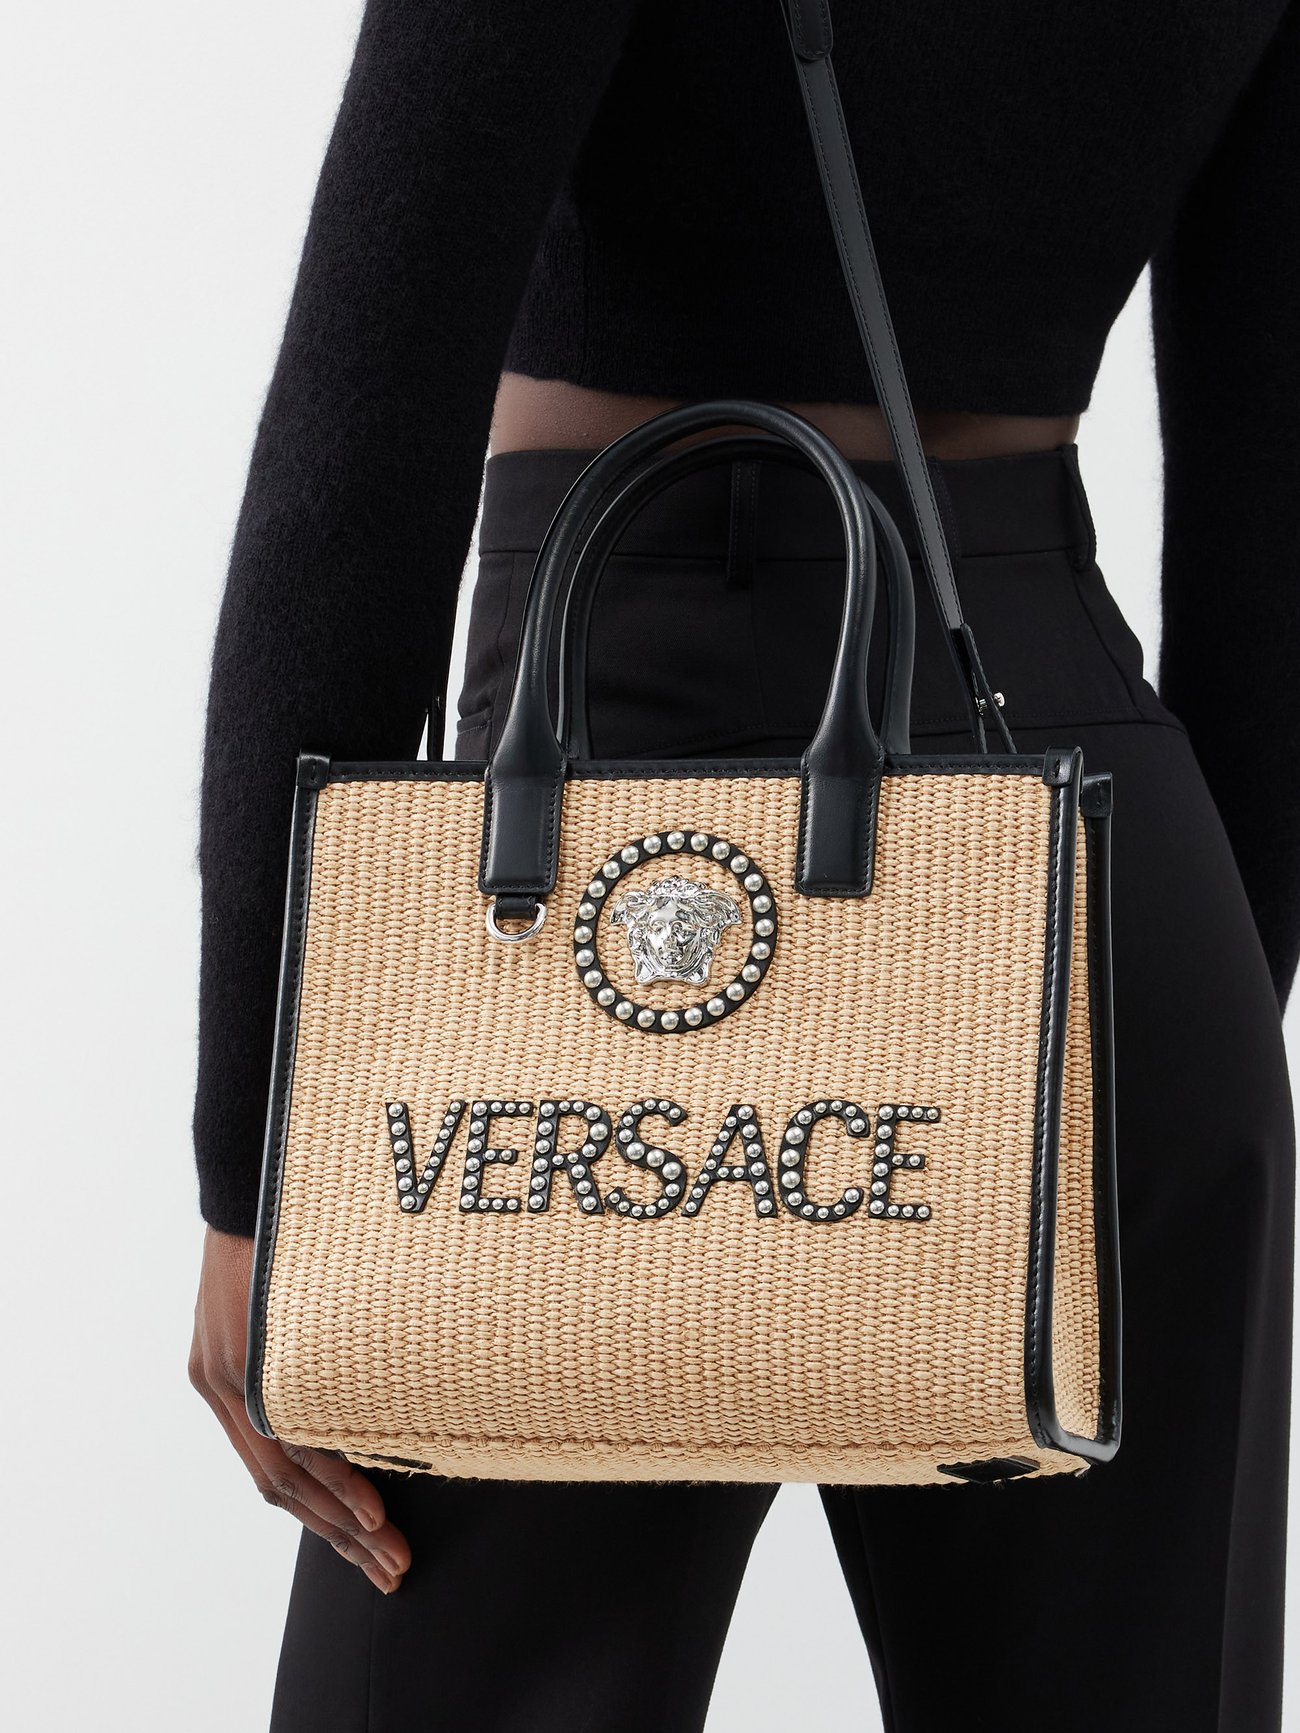 Versace La Medusa bag in raffia and leather with studs - ShopStyle